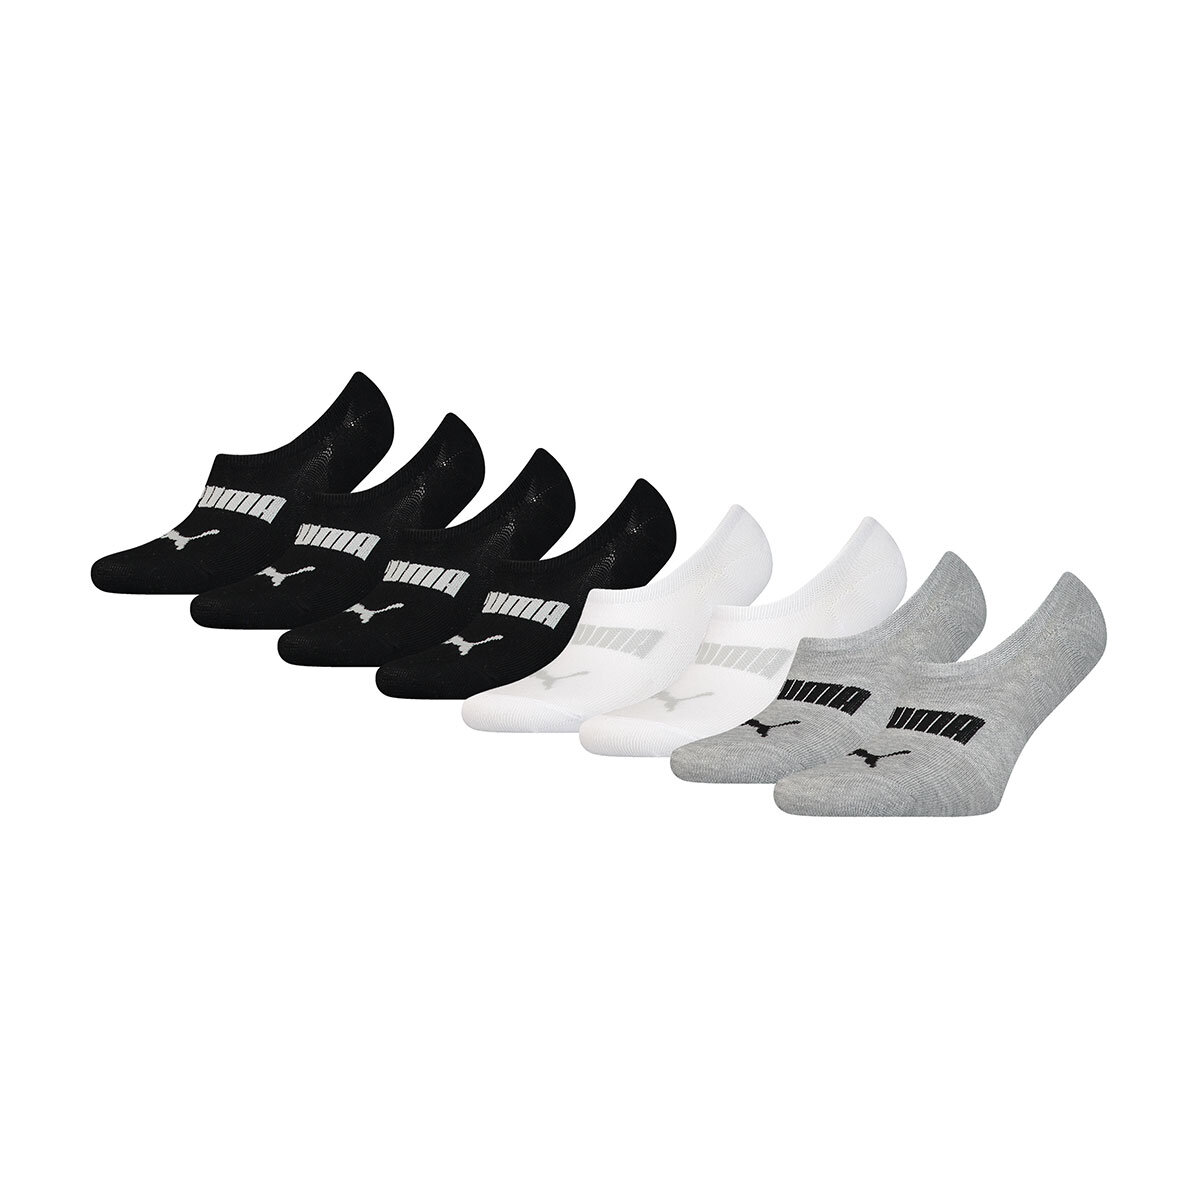 Puma Ladies No Show Sock, 8 Pack in Black - Size 2-5 | Co...